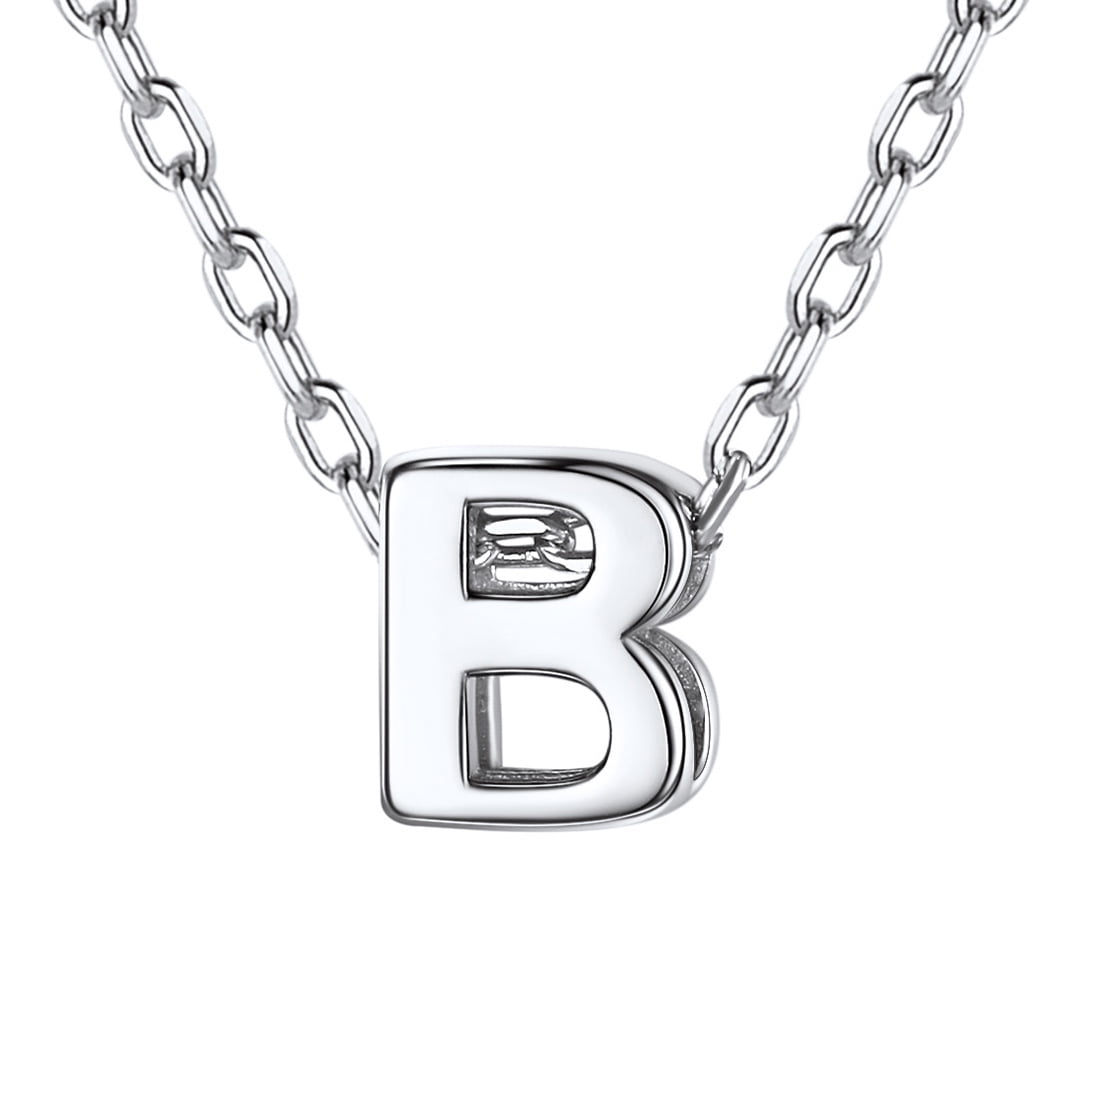 Personalised Initial Heart Sterling Silver Monogram Necklace – Eloise B  Jewellery Designs